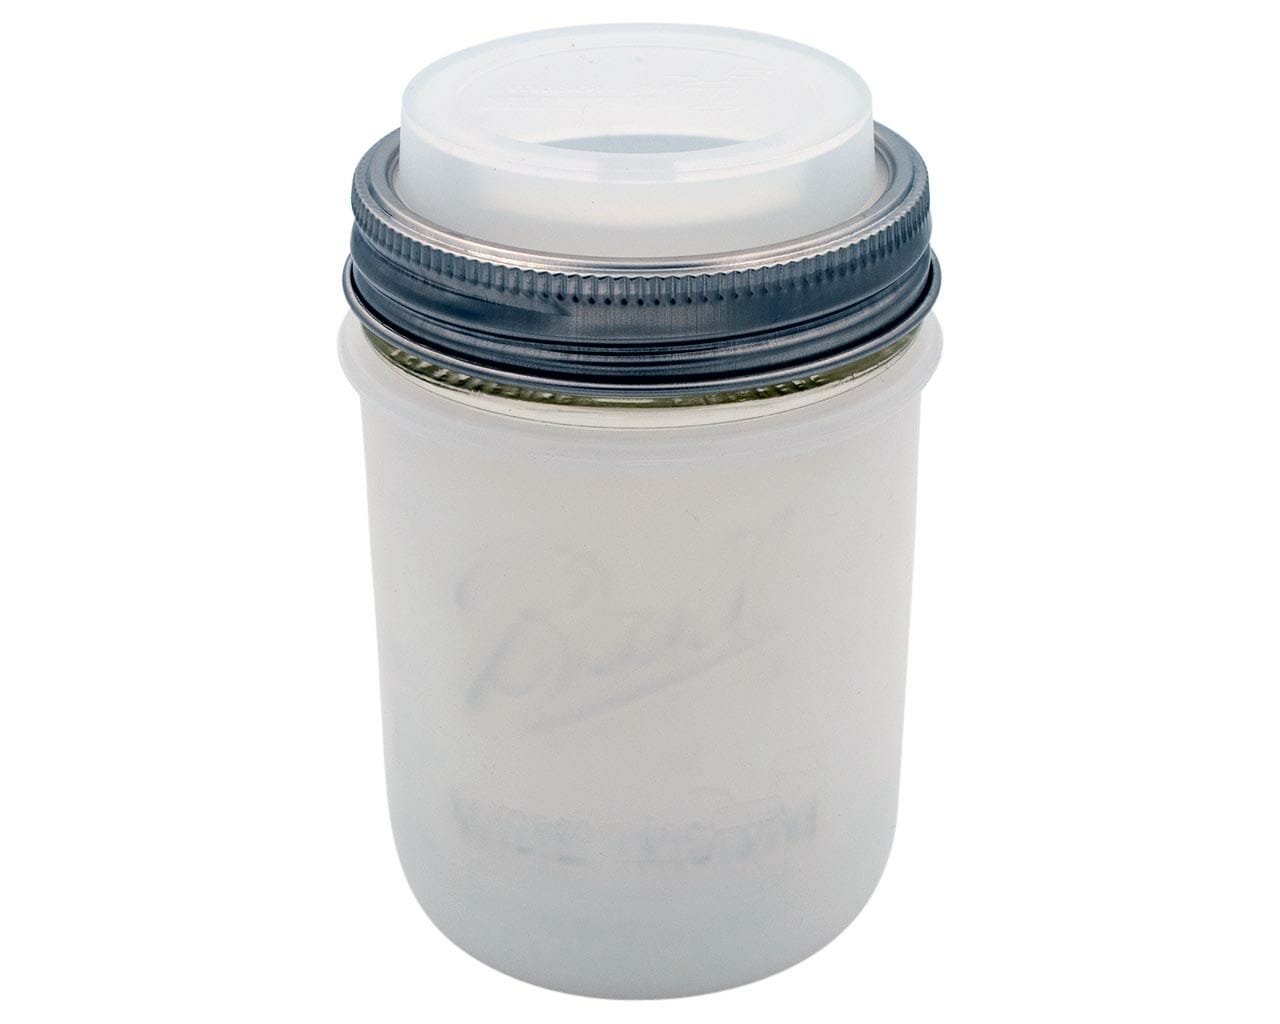 Silicone Mason Jar Protector Sleeves - 16oz (1 pint) Wide-Mouth